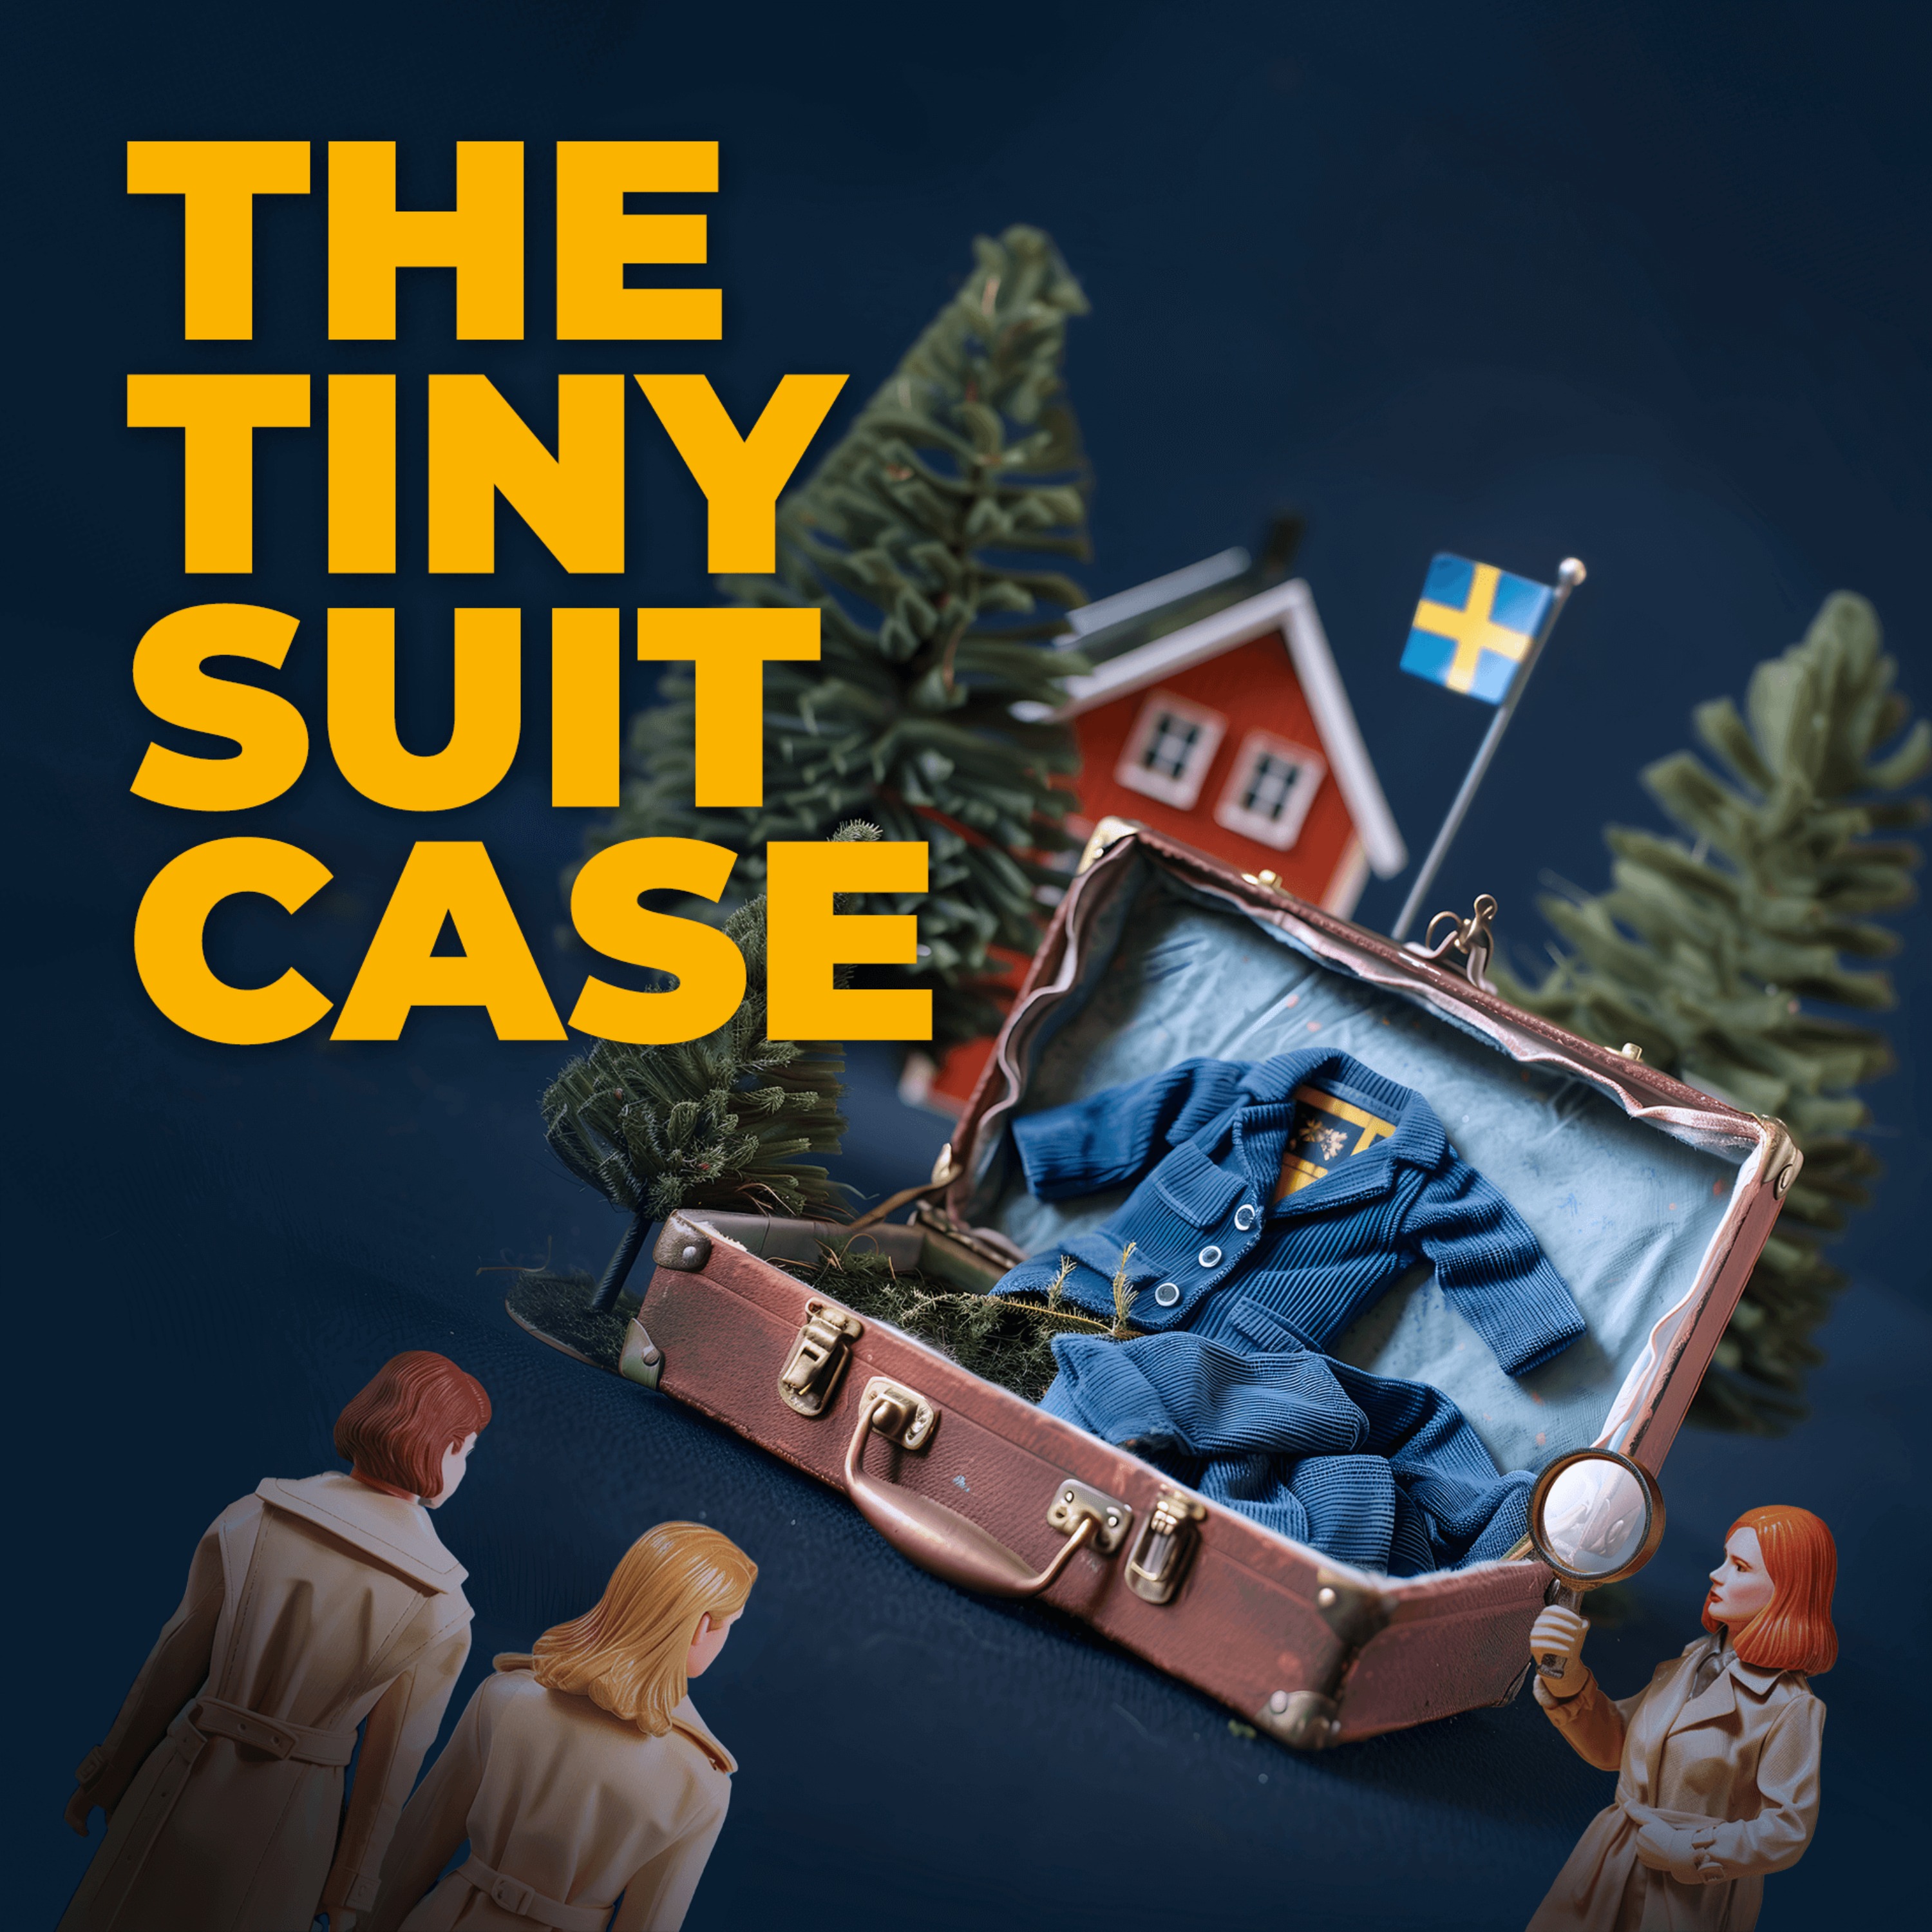 S2 E7 The Case Of The Tiny Suit/Case - ‘Scratchy scratch’